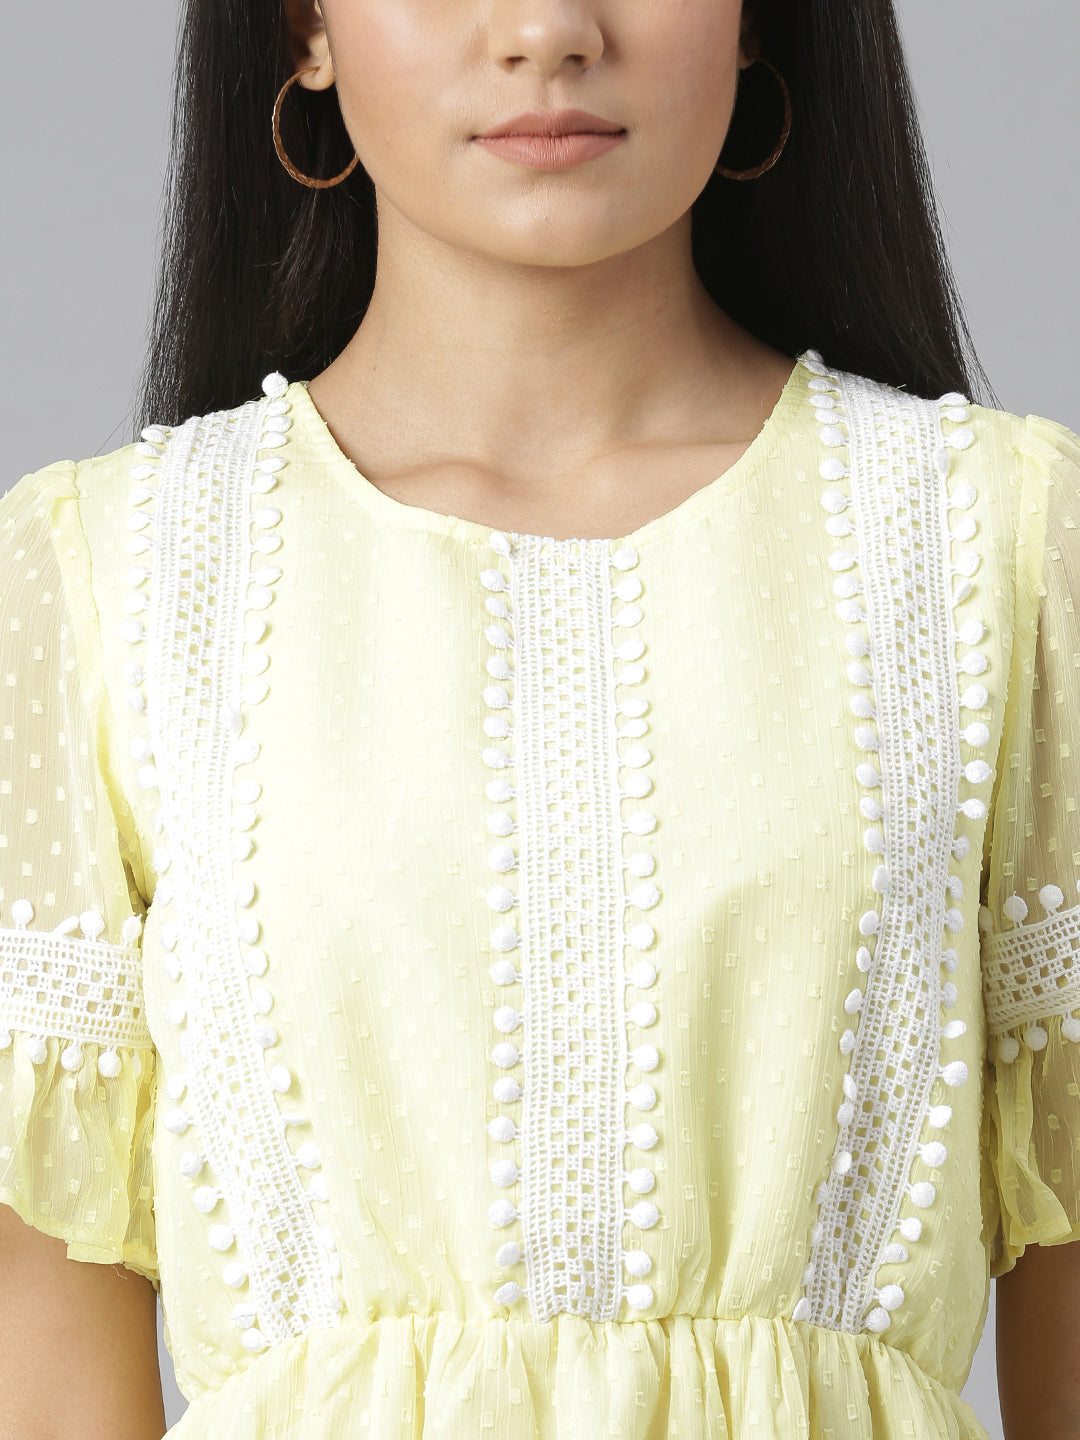 Women's Yellow Self Design Dress with Lace Insets